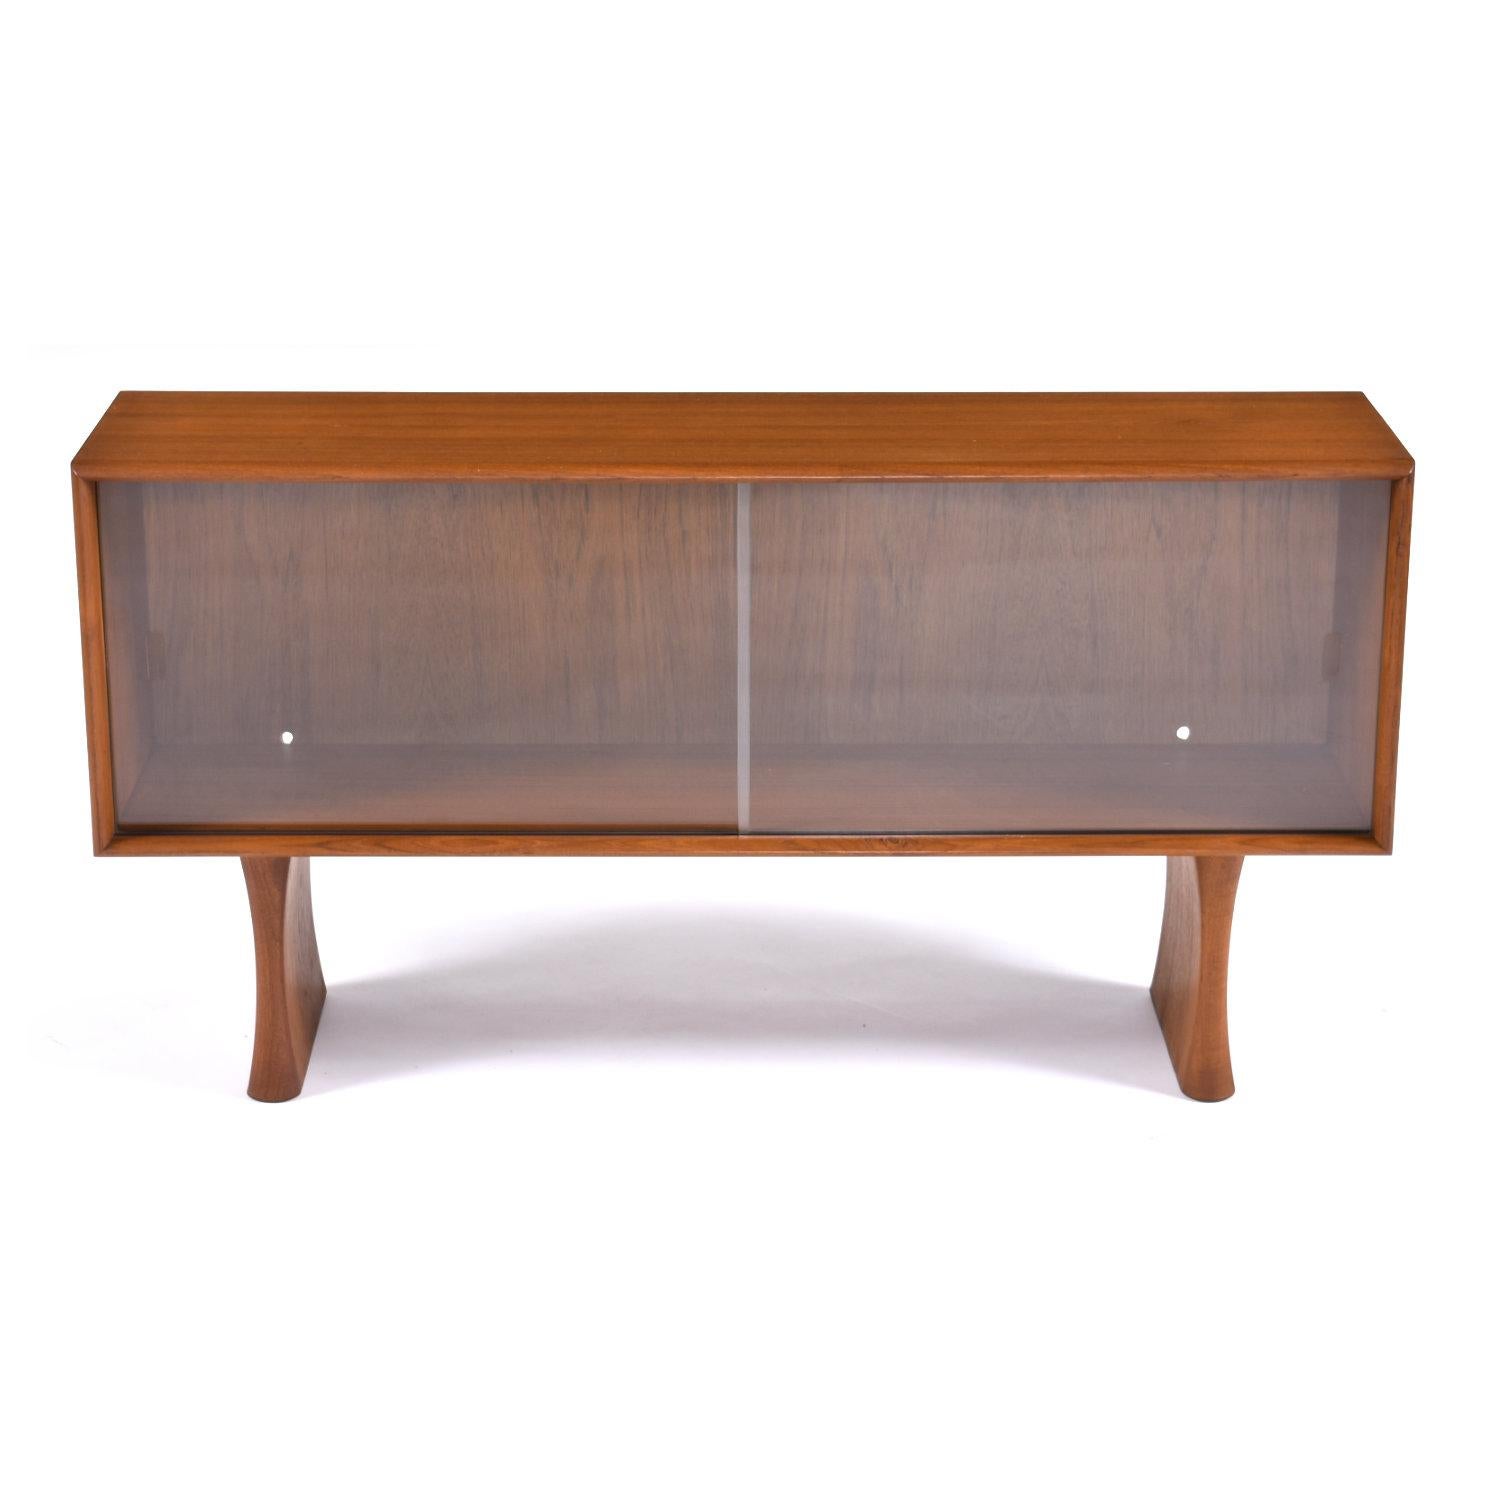 Lovely Mid-Century Modern Danish teak display cabinet with sliding glass doors. This unit can be used independently as a console, display case or media center. Alternatively, place this piece on top of your Danish teak credenza to create a two-piece